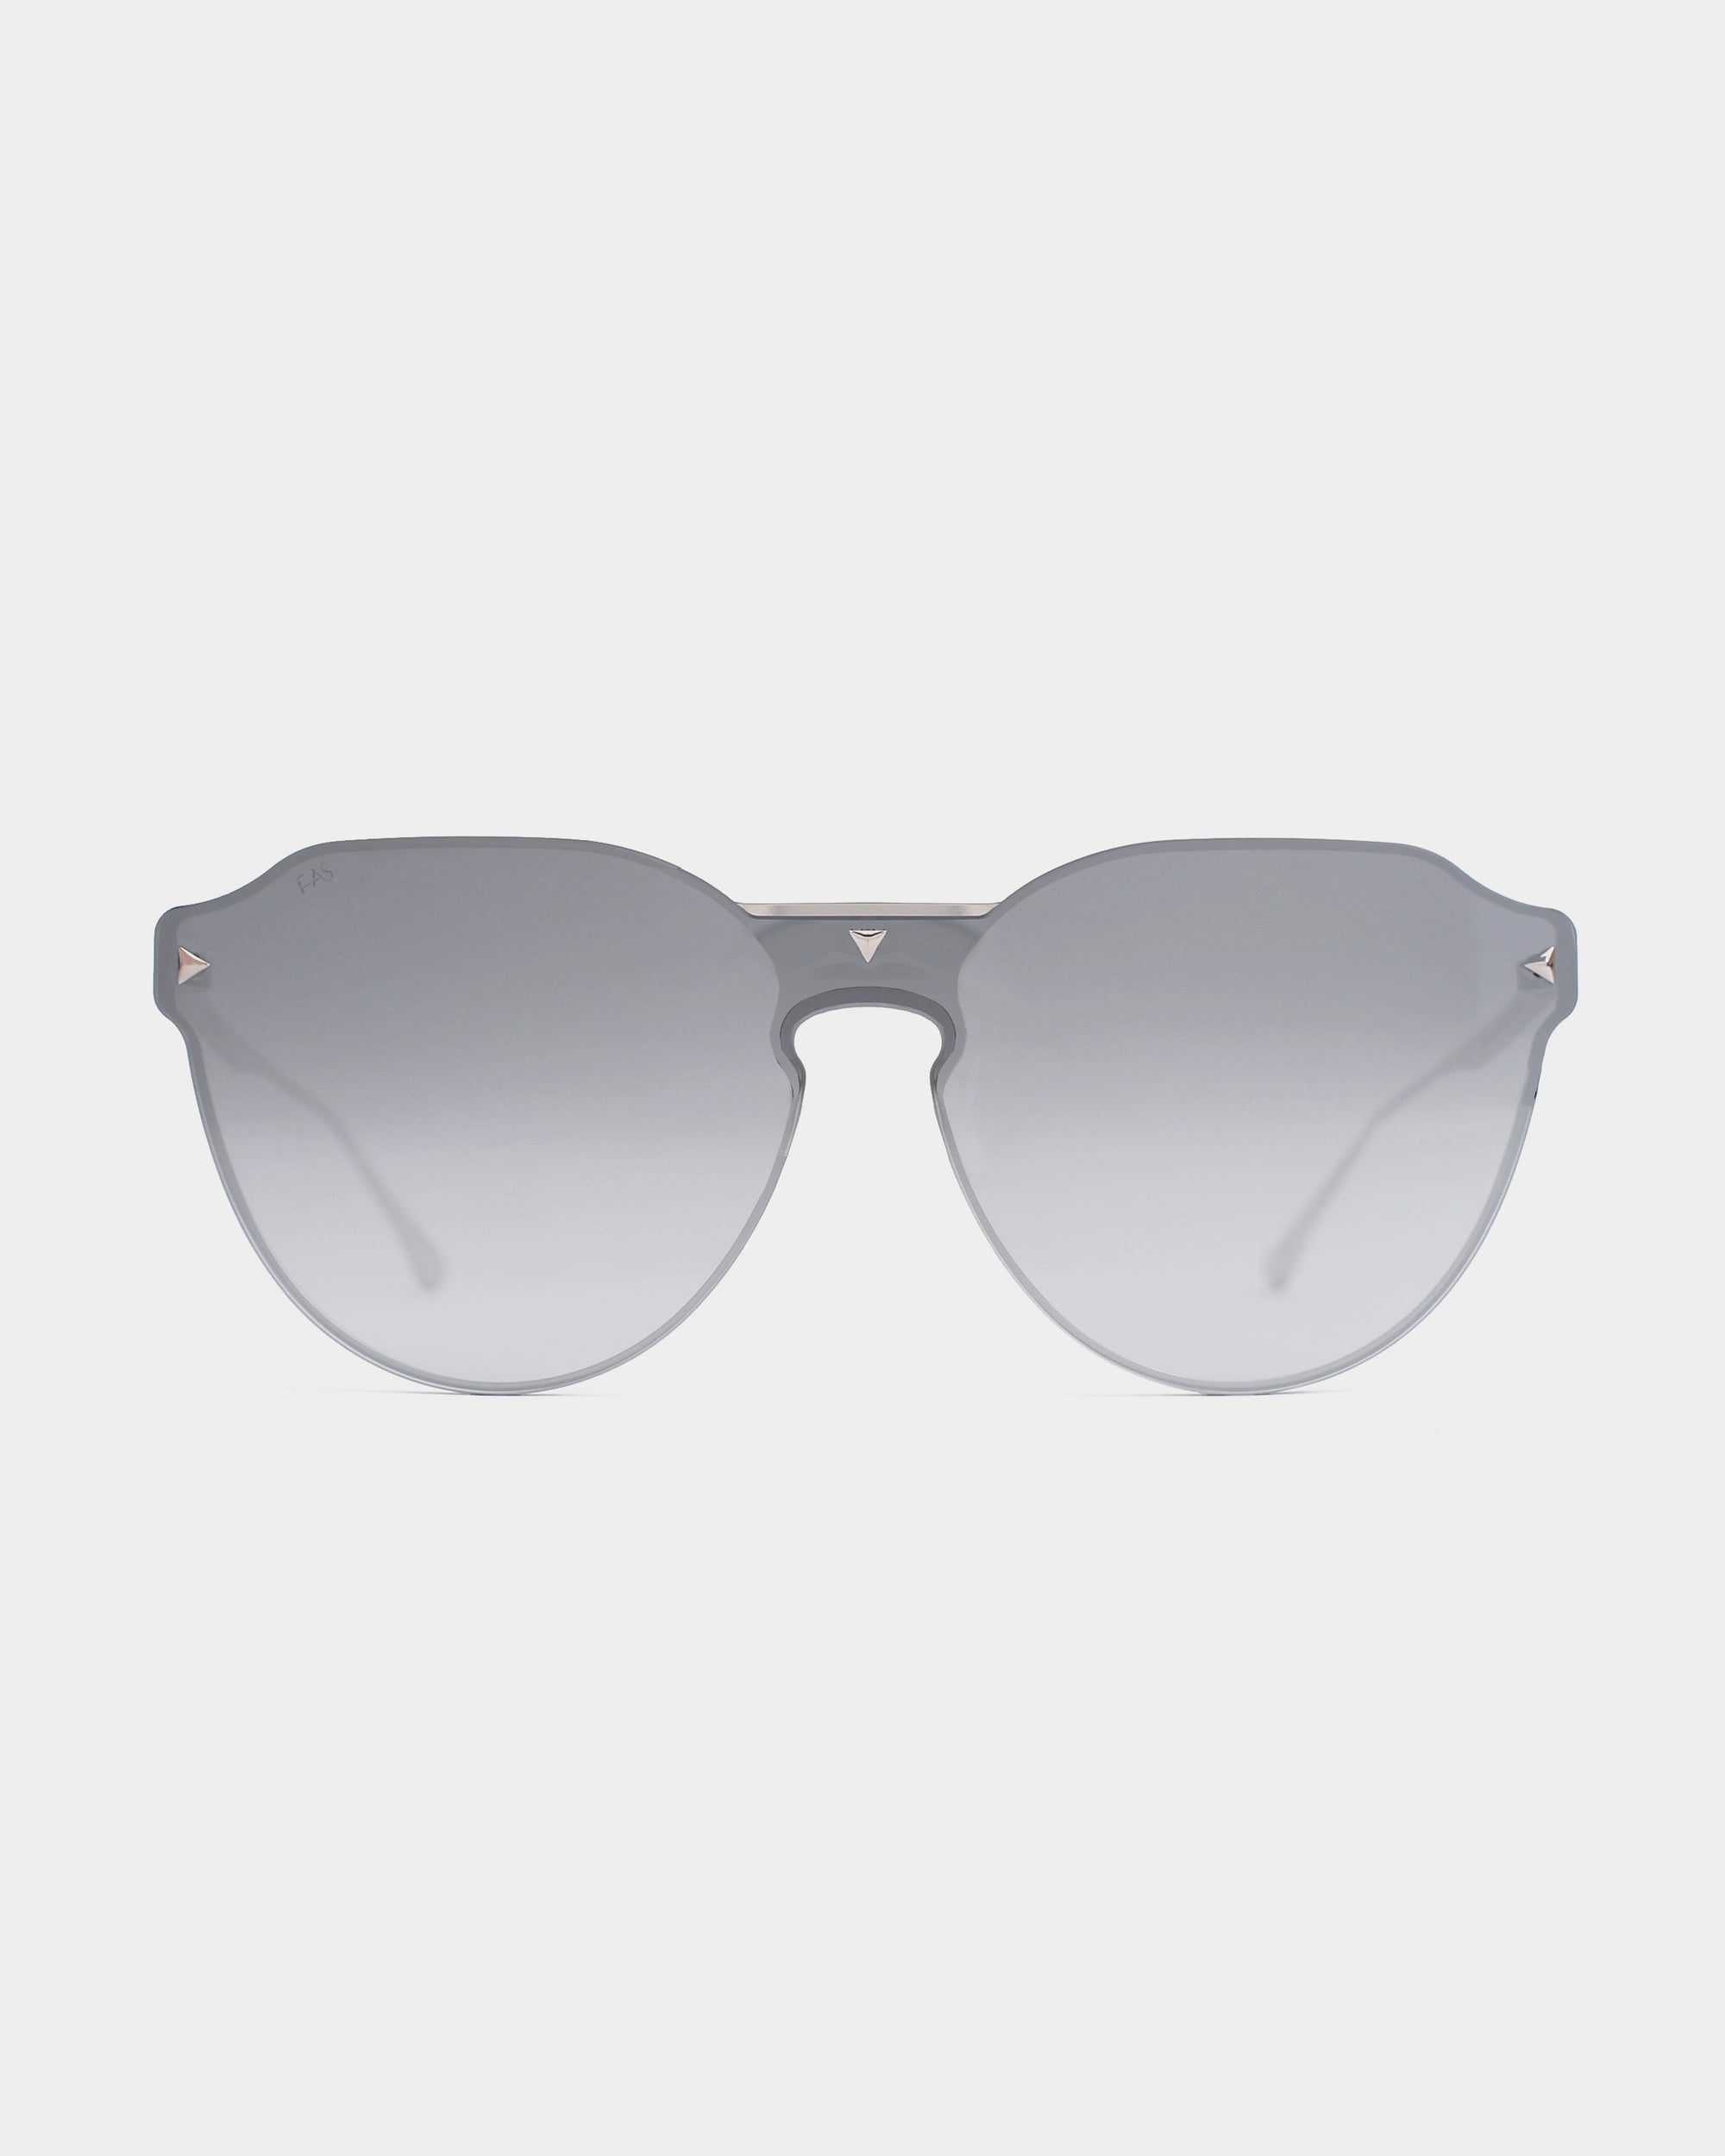 A pair of stylish, frameless Error 404 sunglasses from For Art&#39;s Sake® with large, circular, gradient gray Nylon lenses and a thin metal bridge. The temples, adorned with 18-karat gold plating, are designed in a light-colored metal, offering a sleek and modern appearance against a white background.